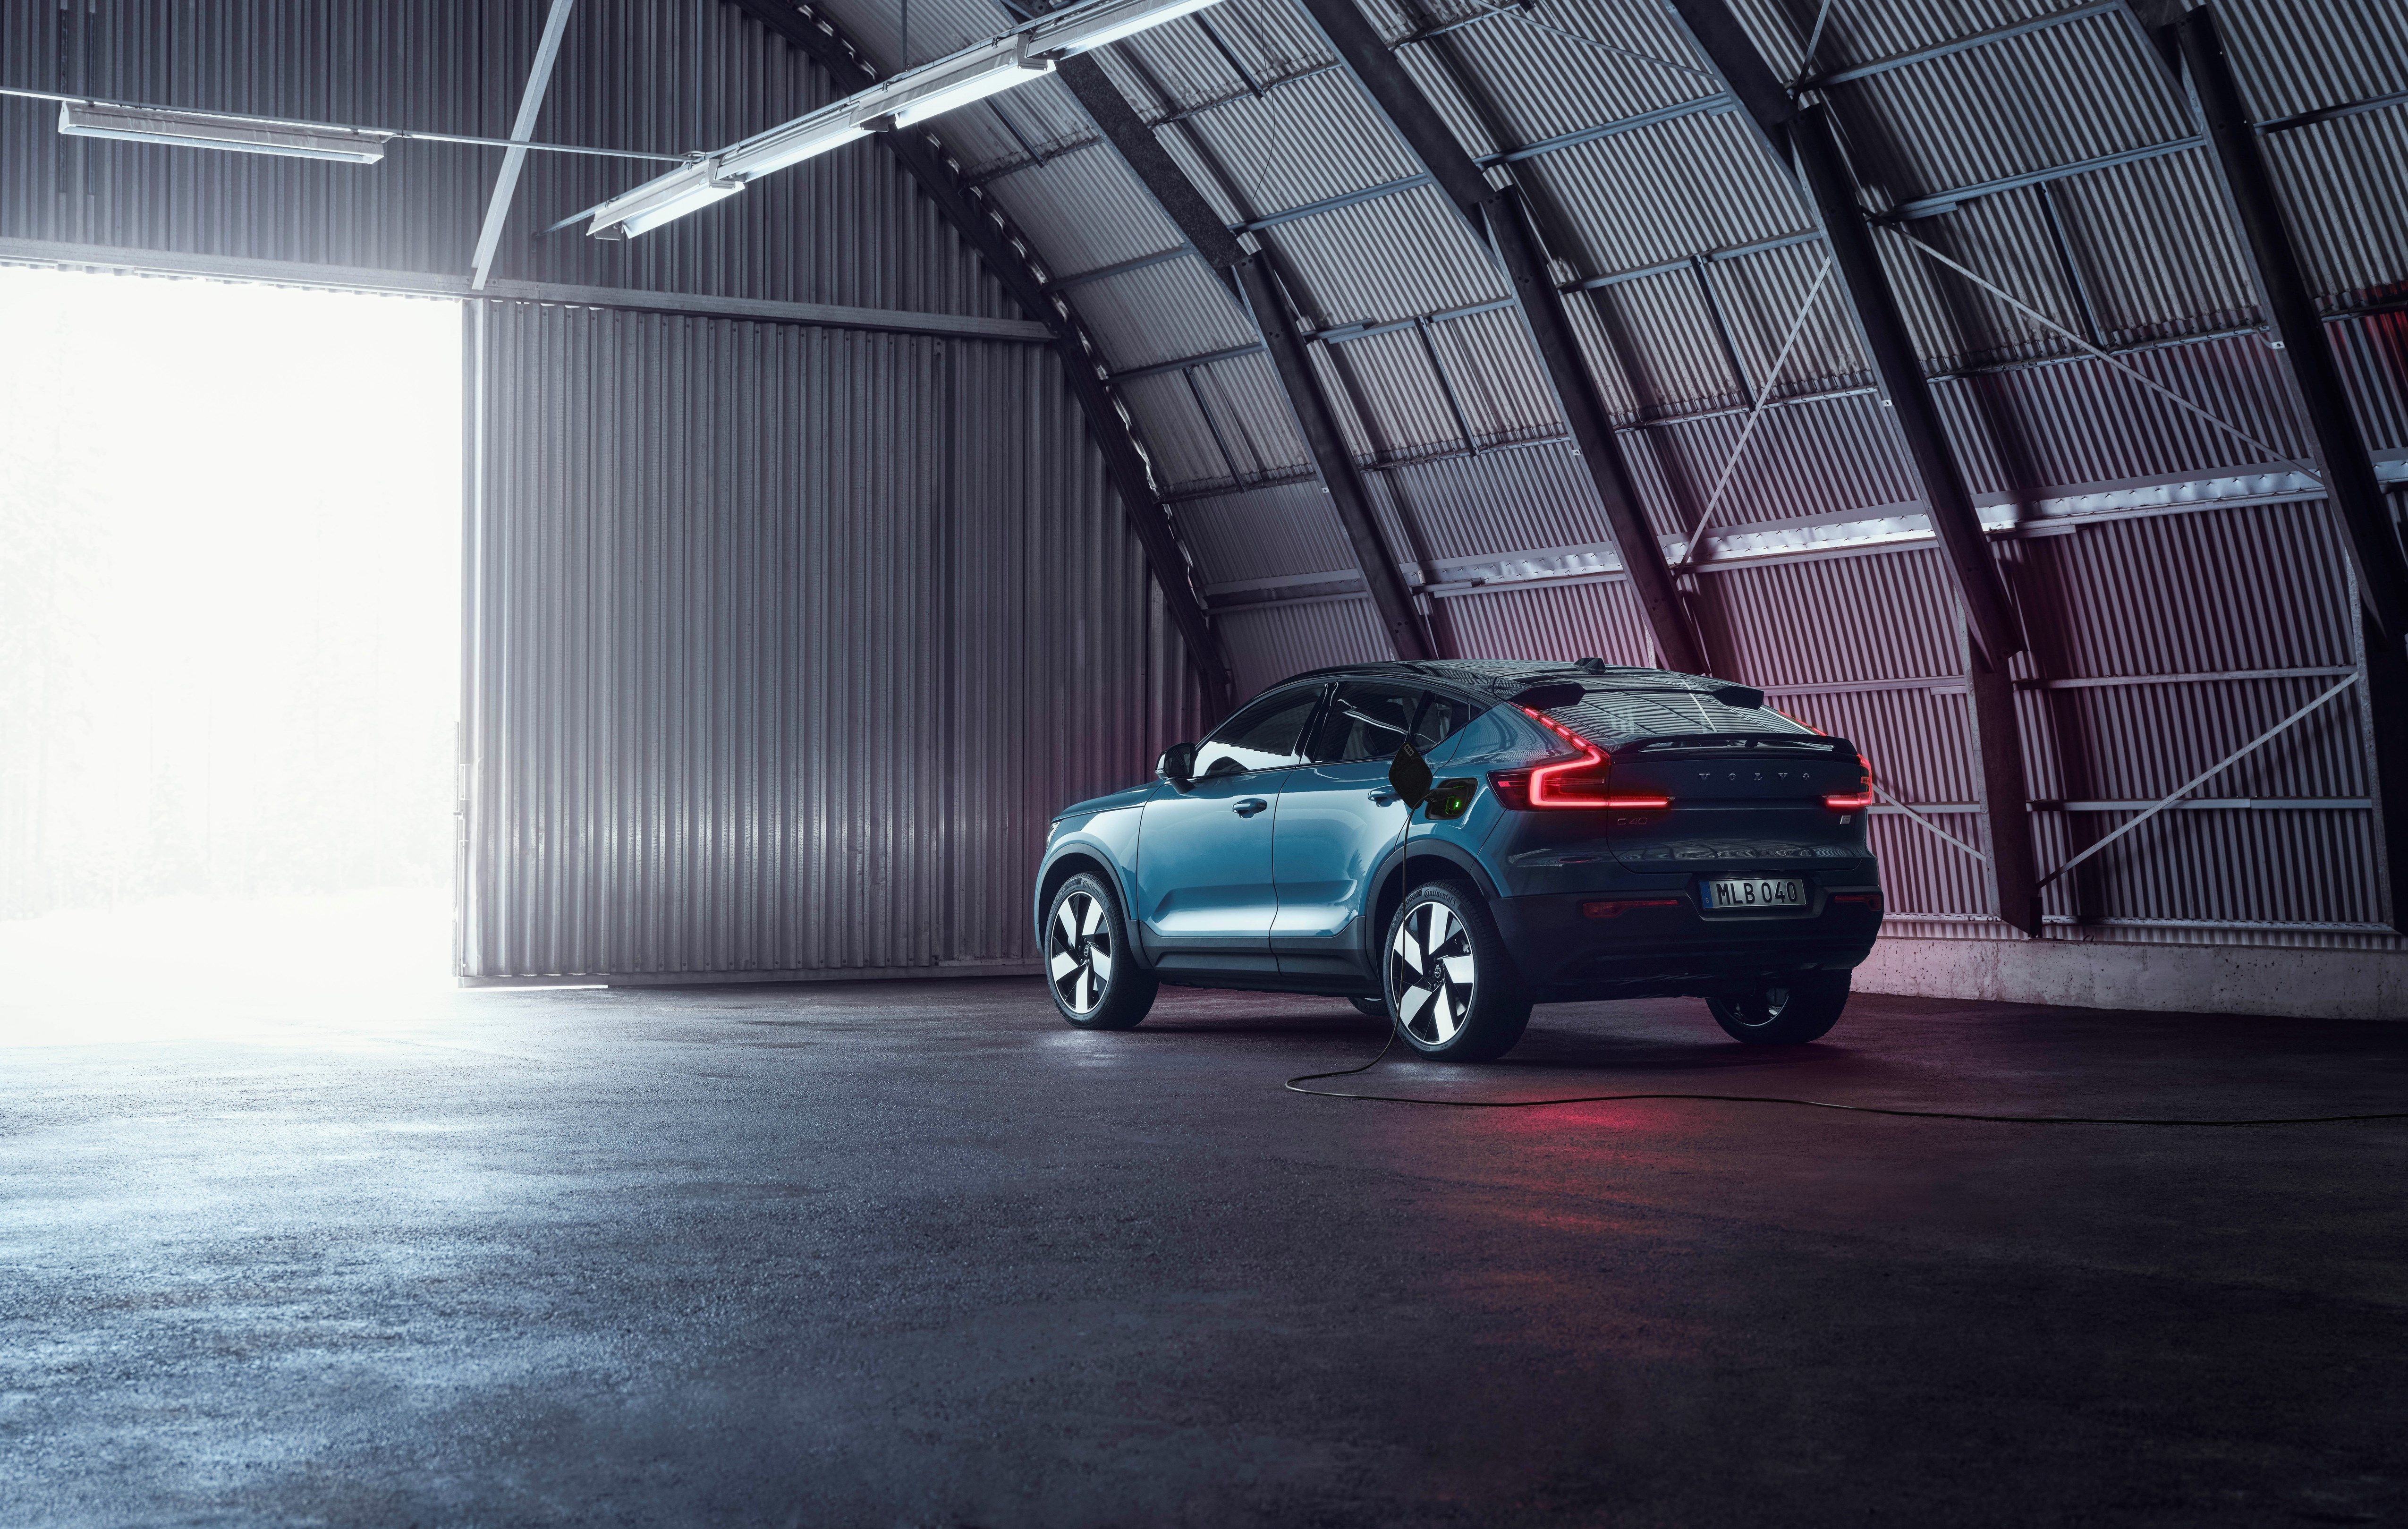 2022 Volvo C40 Recharge - The Swedish Automaker's Crossover With A Sloping Roofline